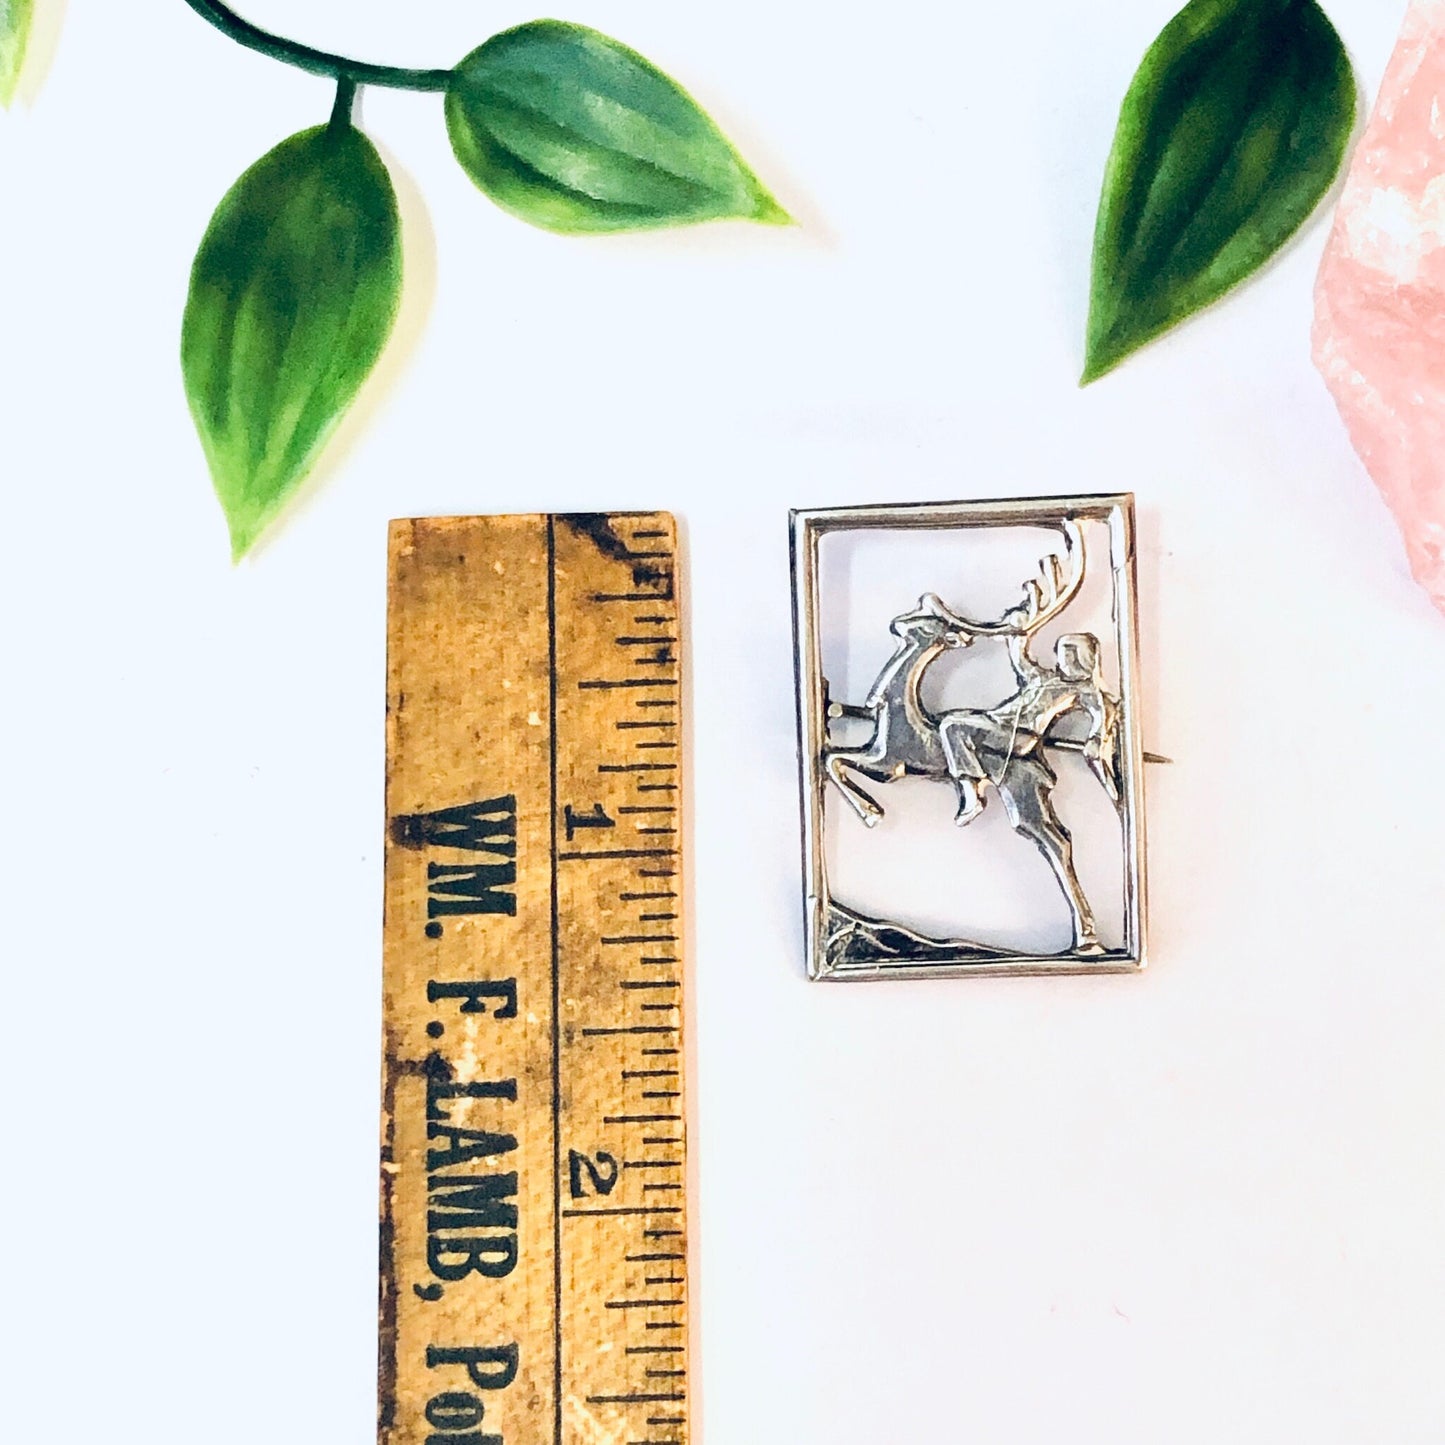 Vintage silver deer brooch with cut-out design featuring a man riding the deer, displayed with a wooden ruler and green leaves on a white background.